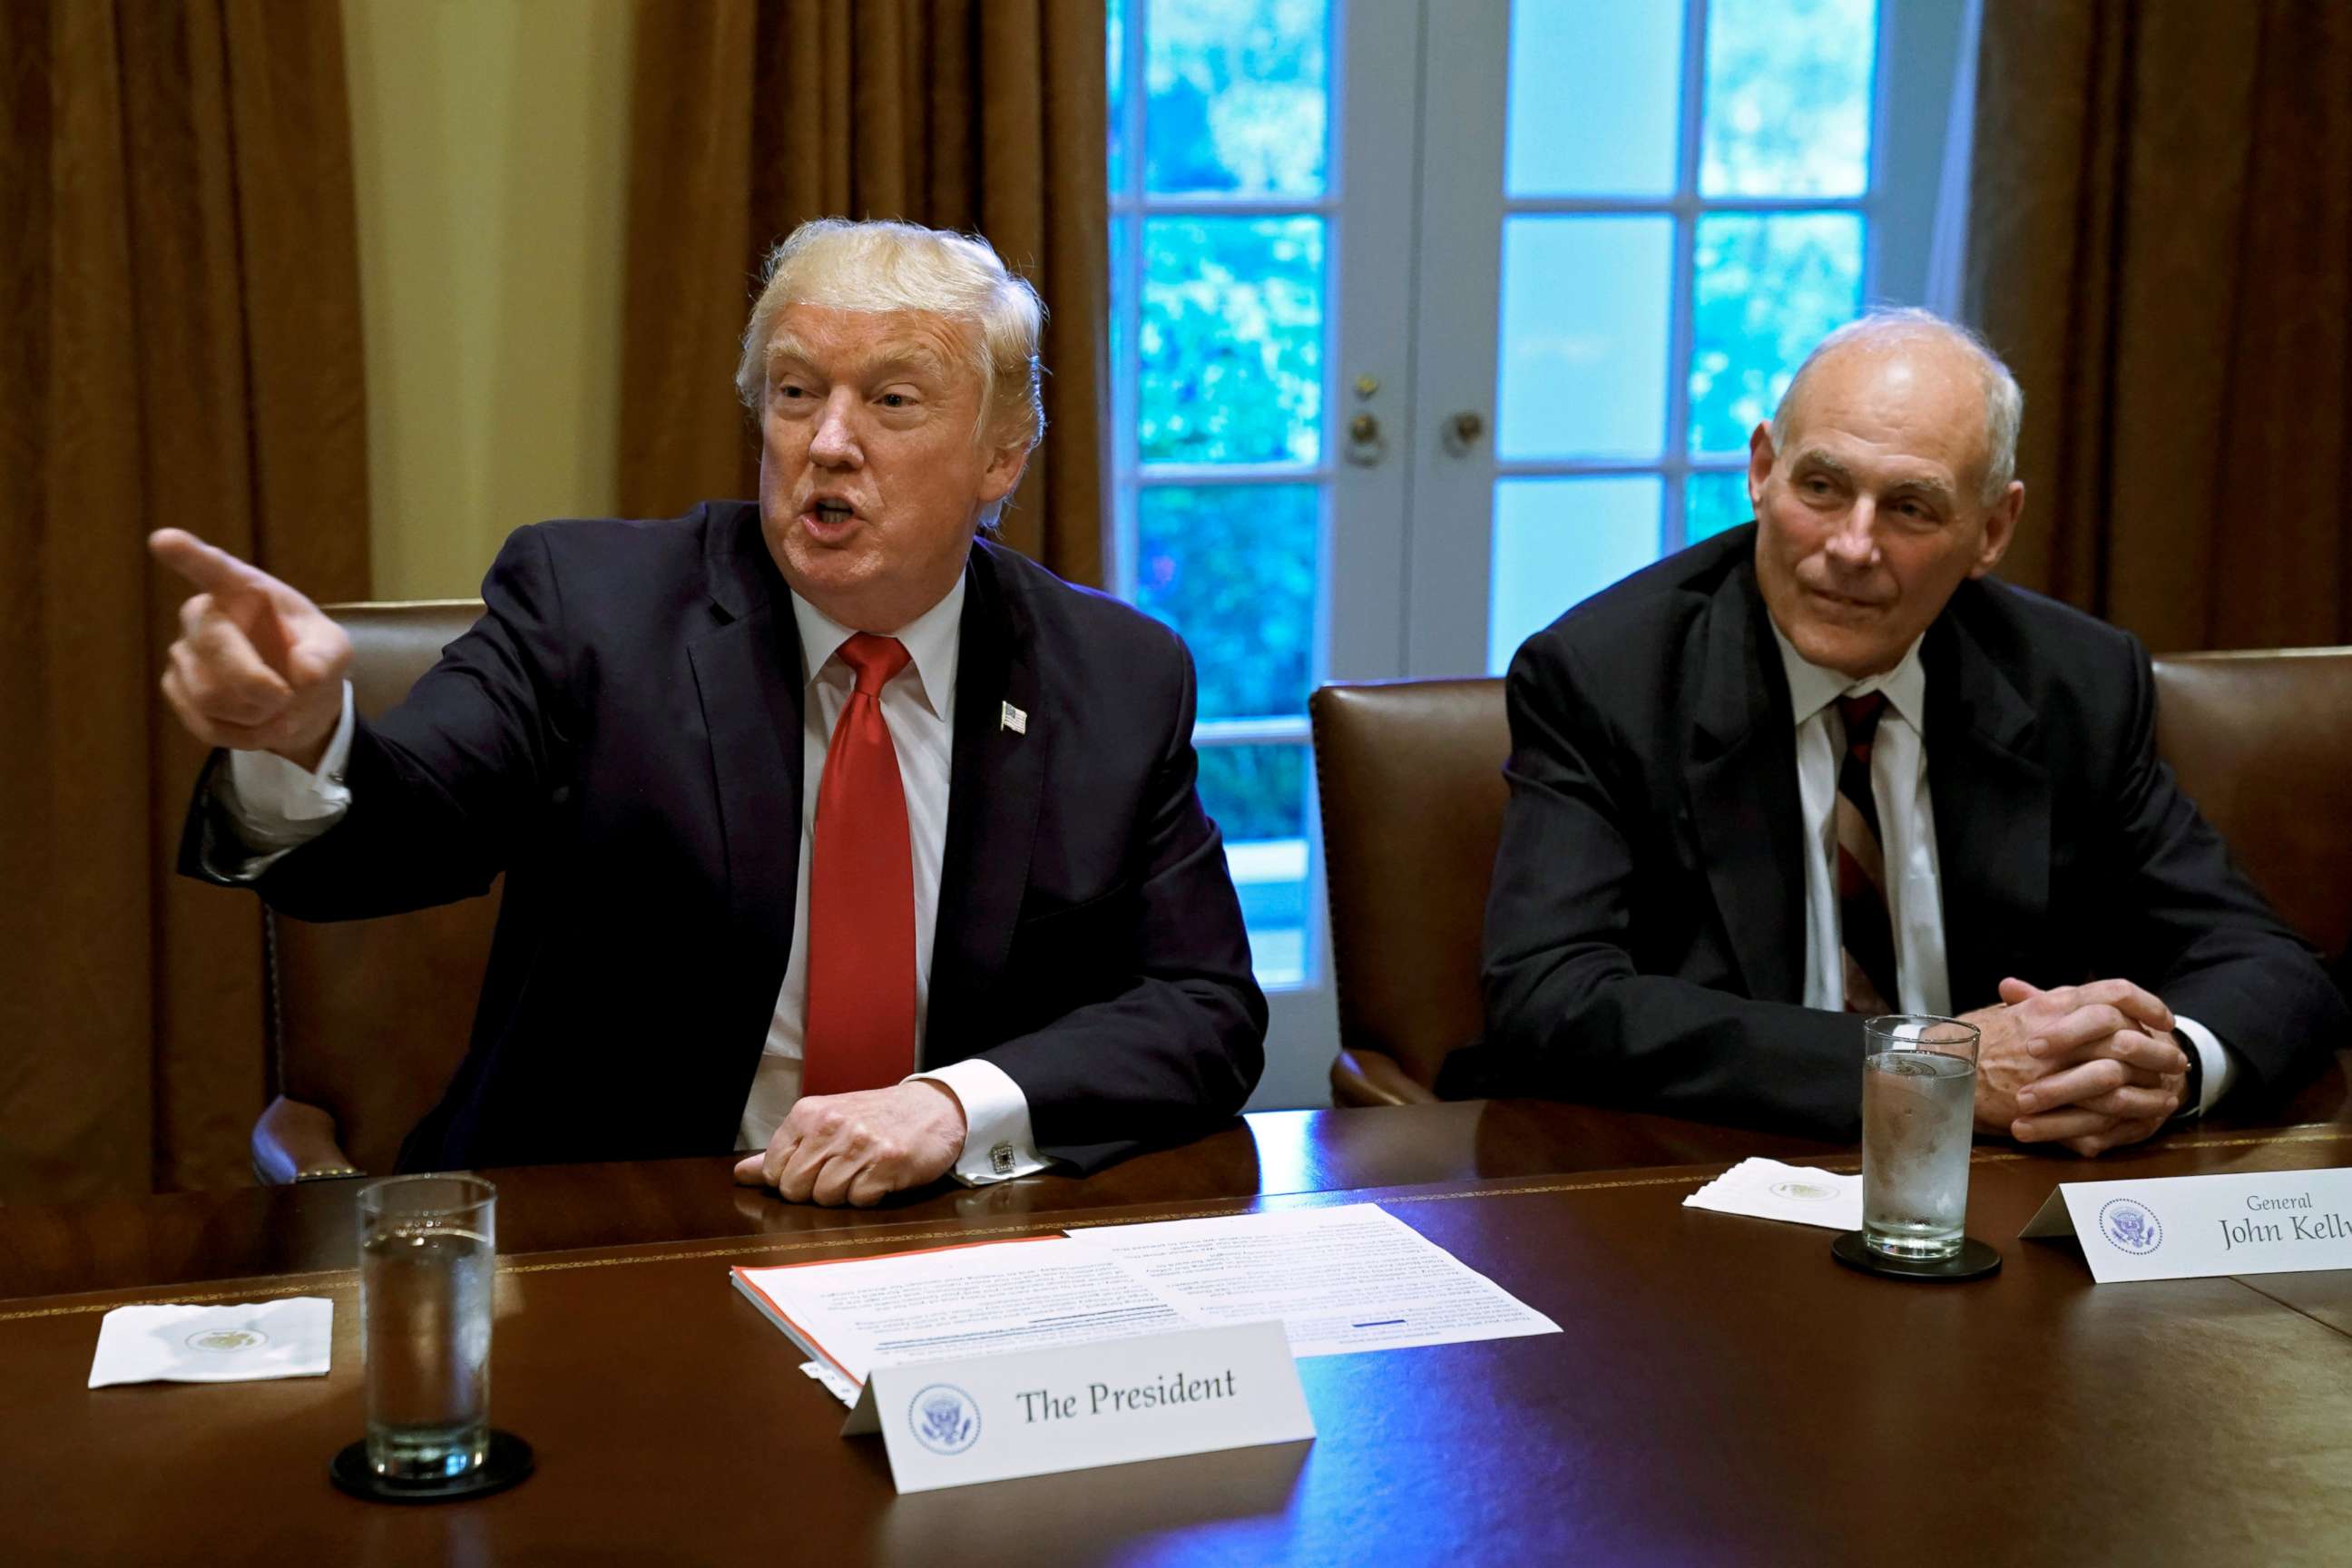 PHOTO: President Donald Trump gestures next to White House Chief of Staff John Kelly during a briefing with senior military leaders at the White House in Washington, D.C., Oct. 5, 2017.